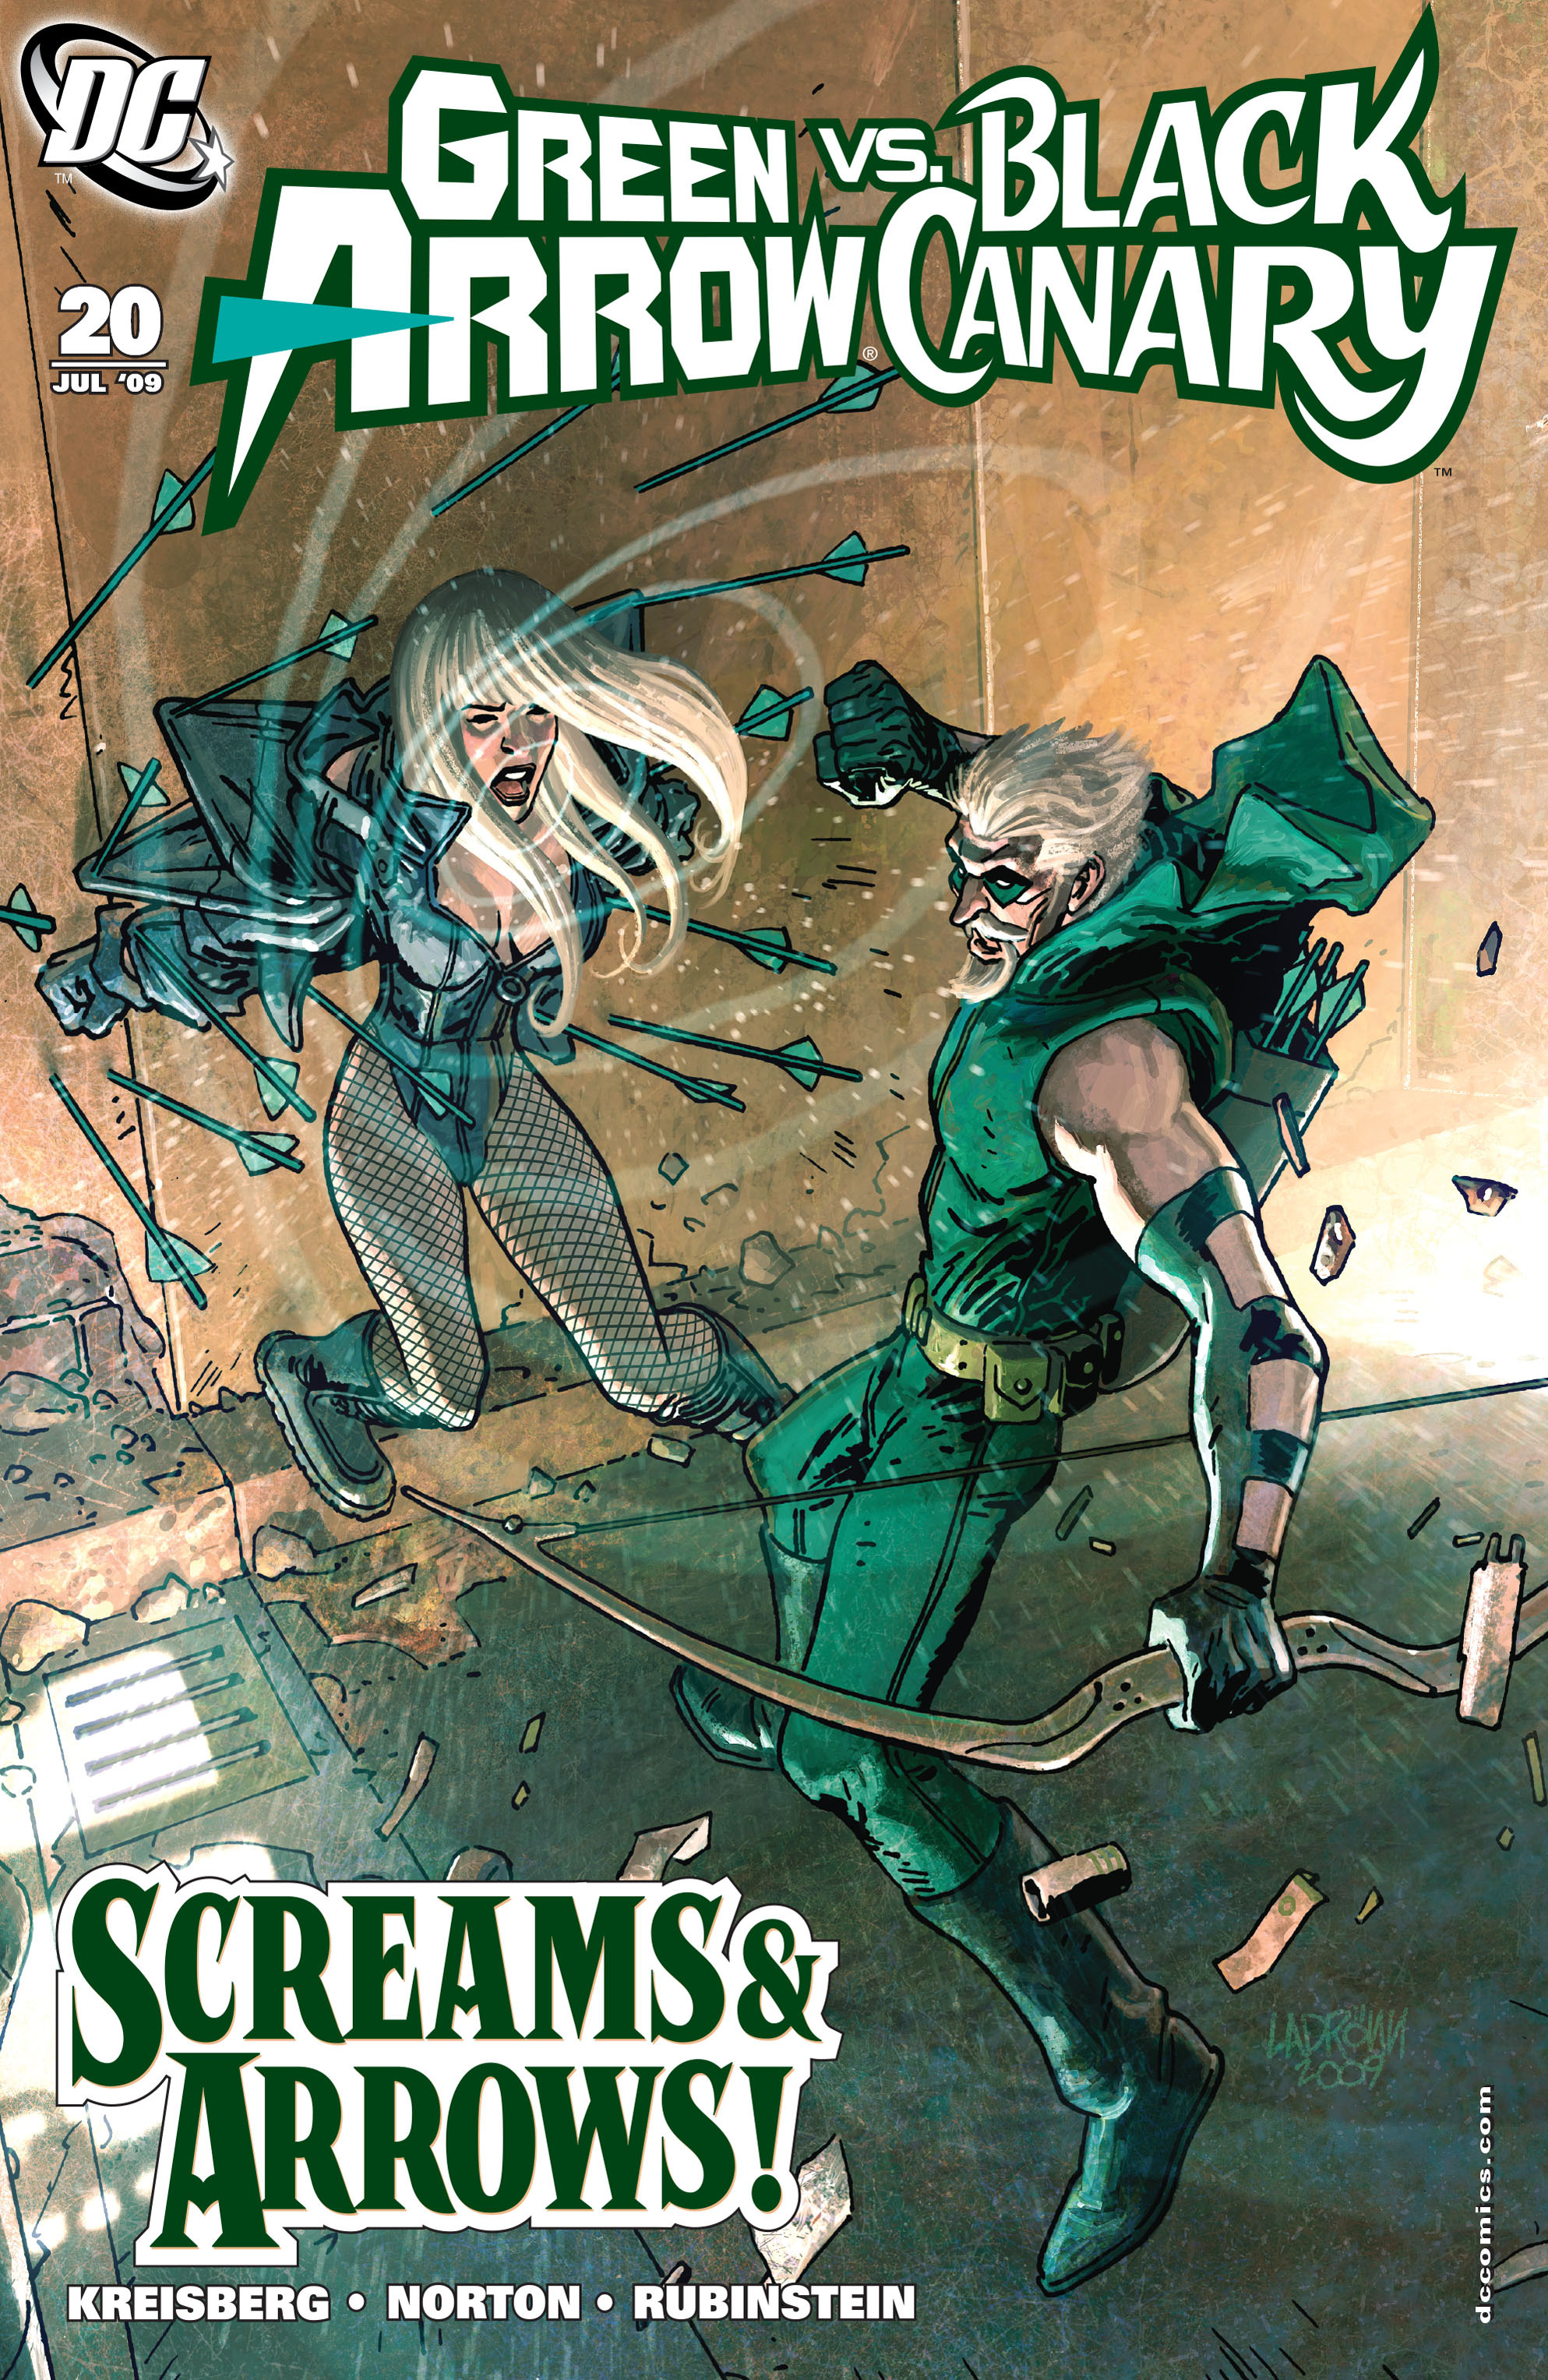 Read online Green Arrow/Black Canary comic -  Issue #20 - 1